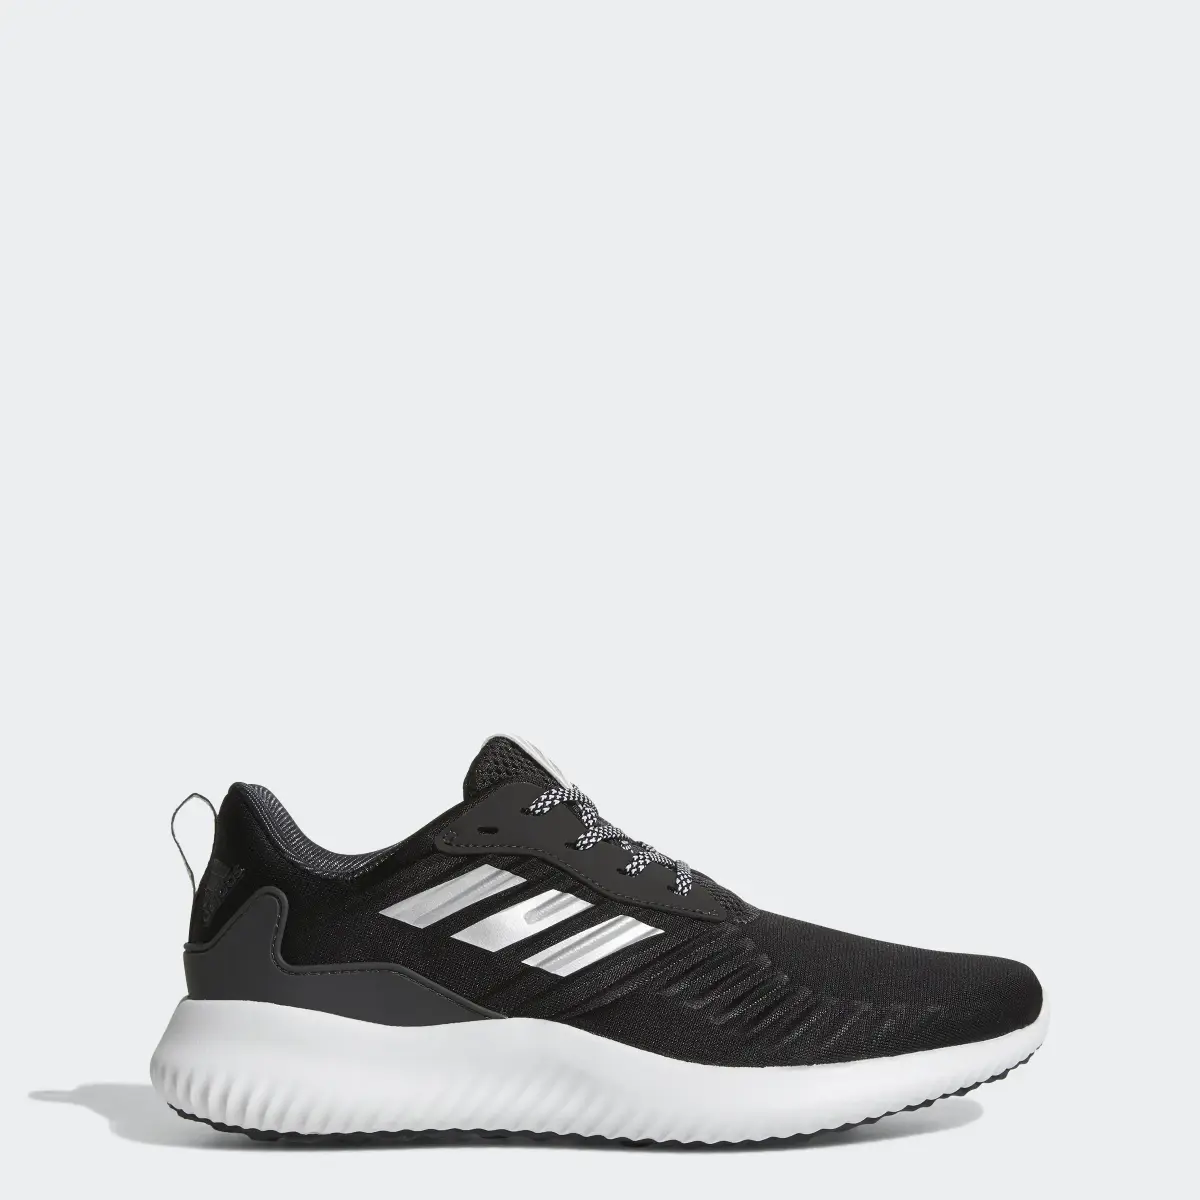 Adidas Alphabounce RC Shoes. 1